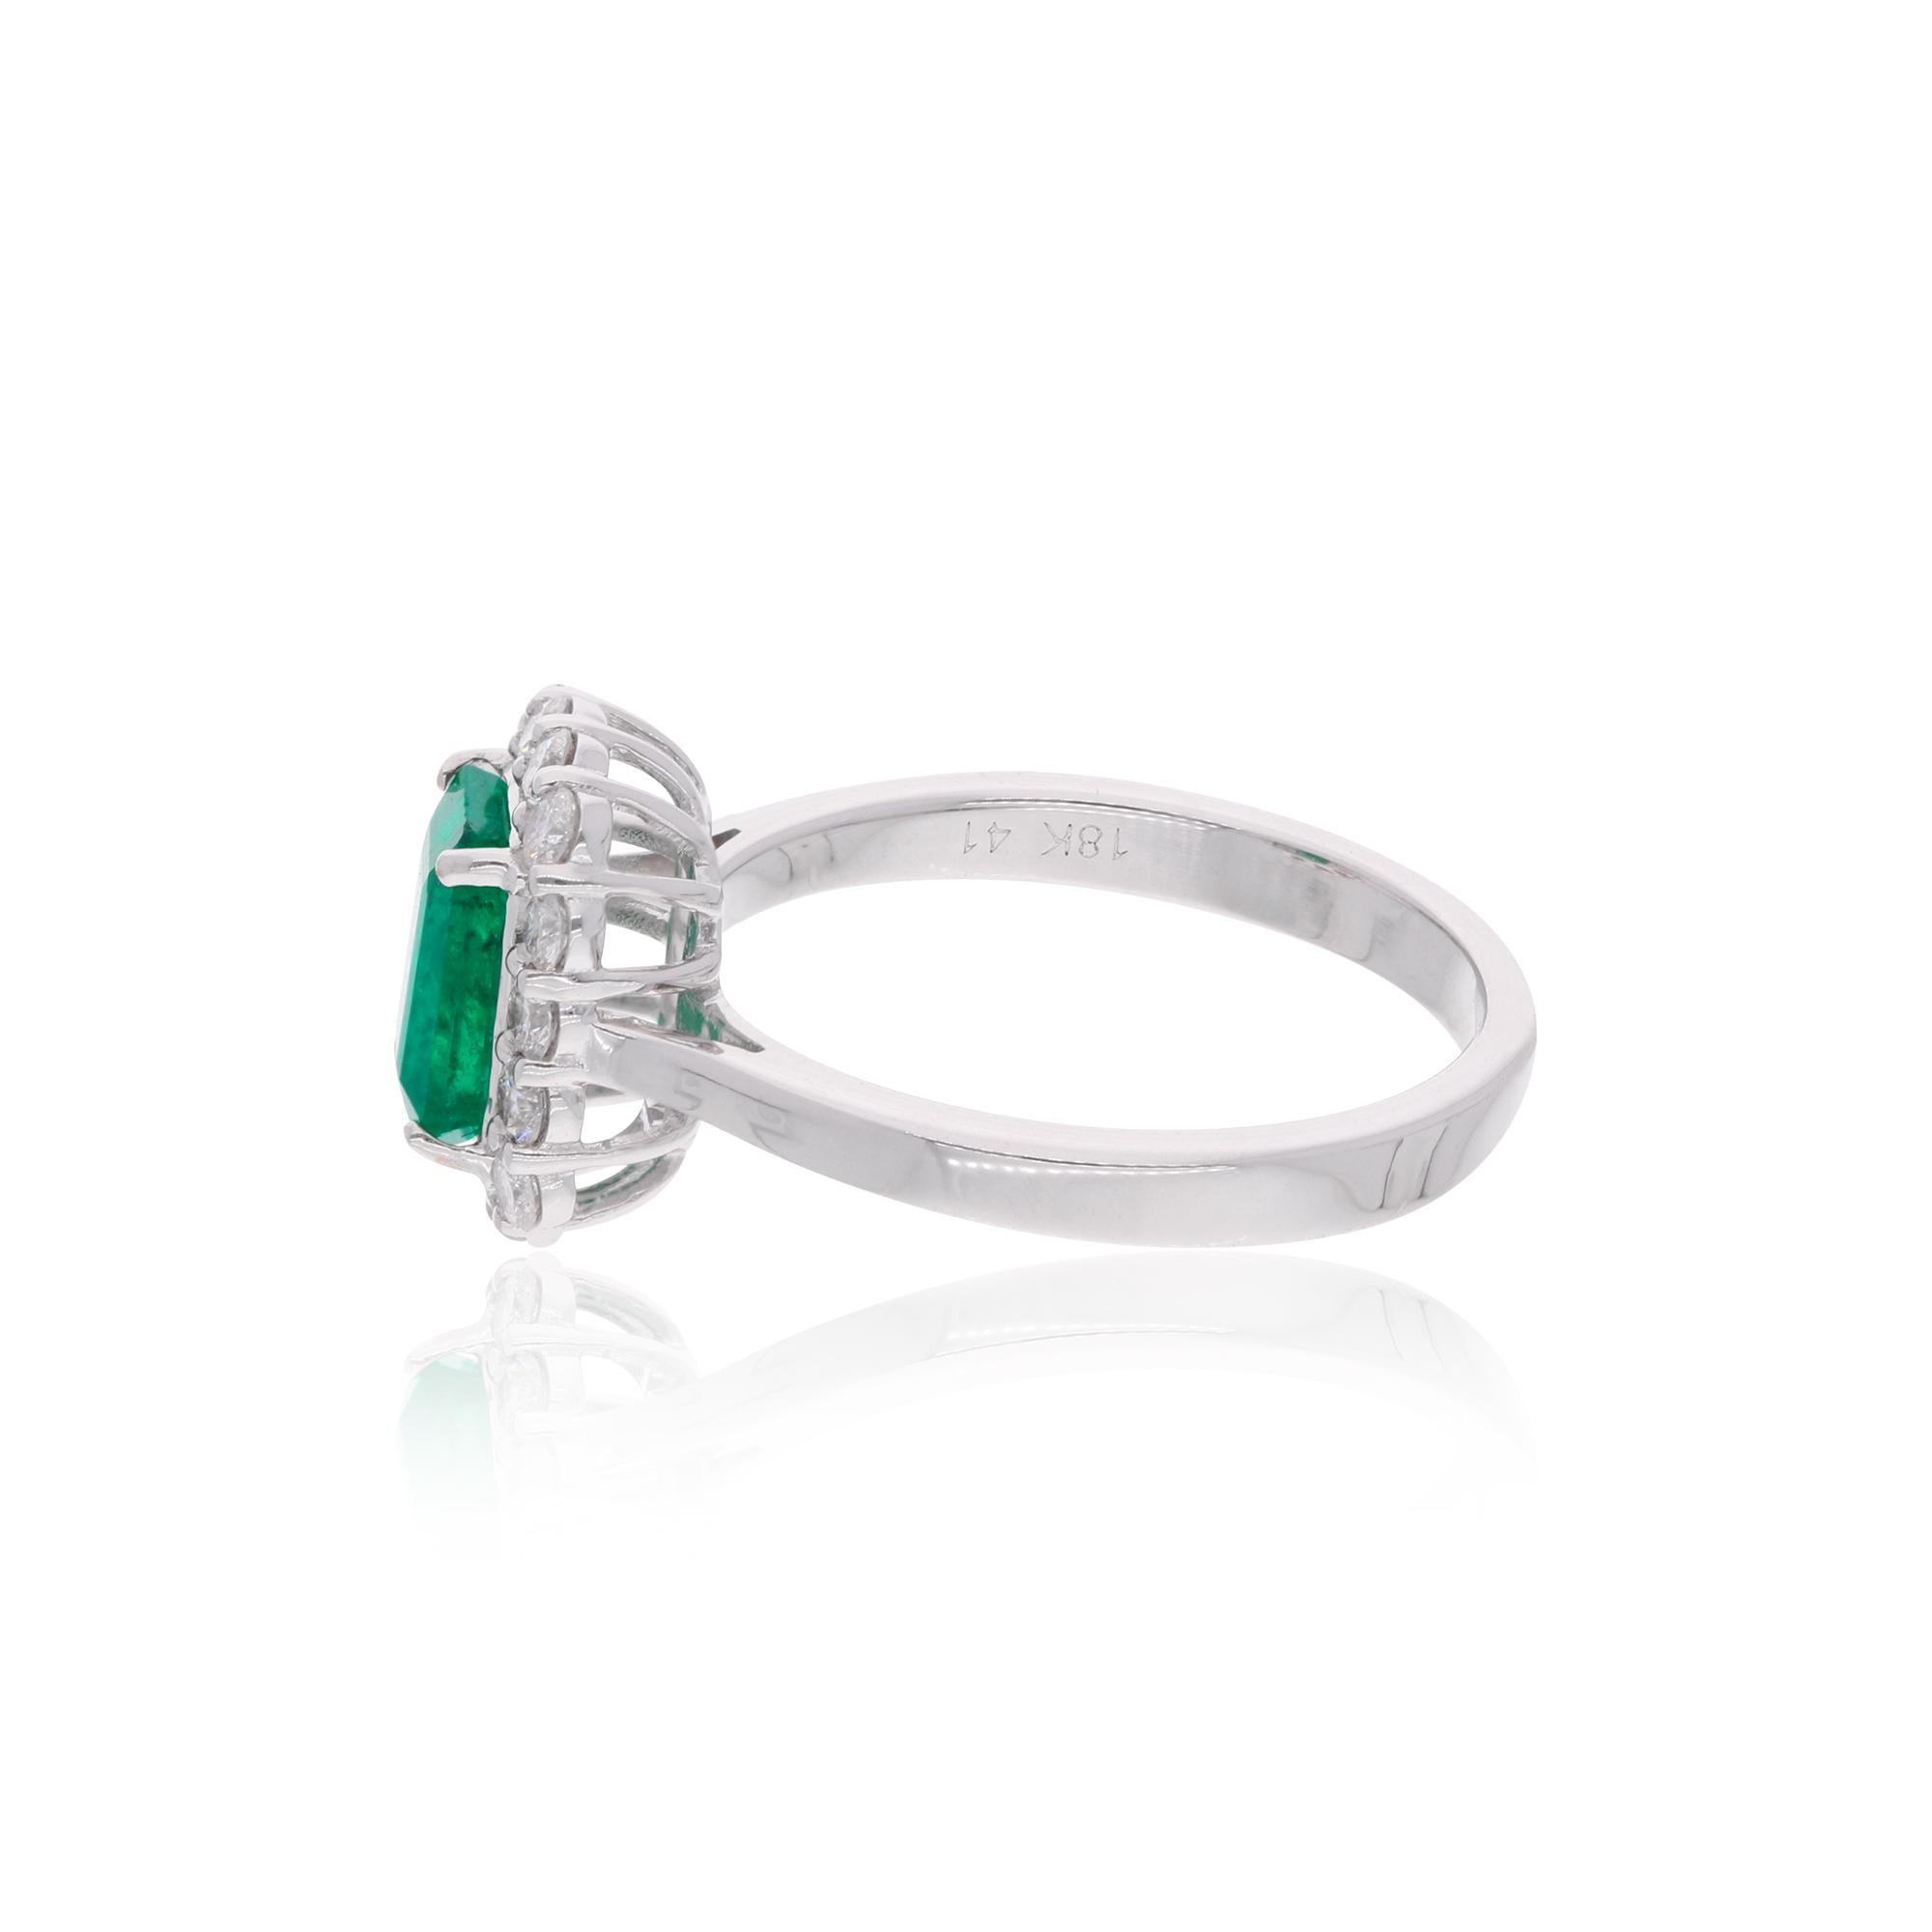 Item Code :- SER-22708
Gross Wt. :- 4.67 gm
Solid 18k White Gold Wt. :- 4.25 gm
Natural Diamond Wt. :- 0.50 Ct. ( AVERAGE DIAMOND CLARITY SI1-SI2 & COLOR H-I )
Zambian Emerald Wt. :- 1.62 Ct.
Ring Size :- 7 US & All size available

✦